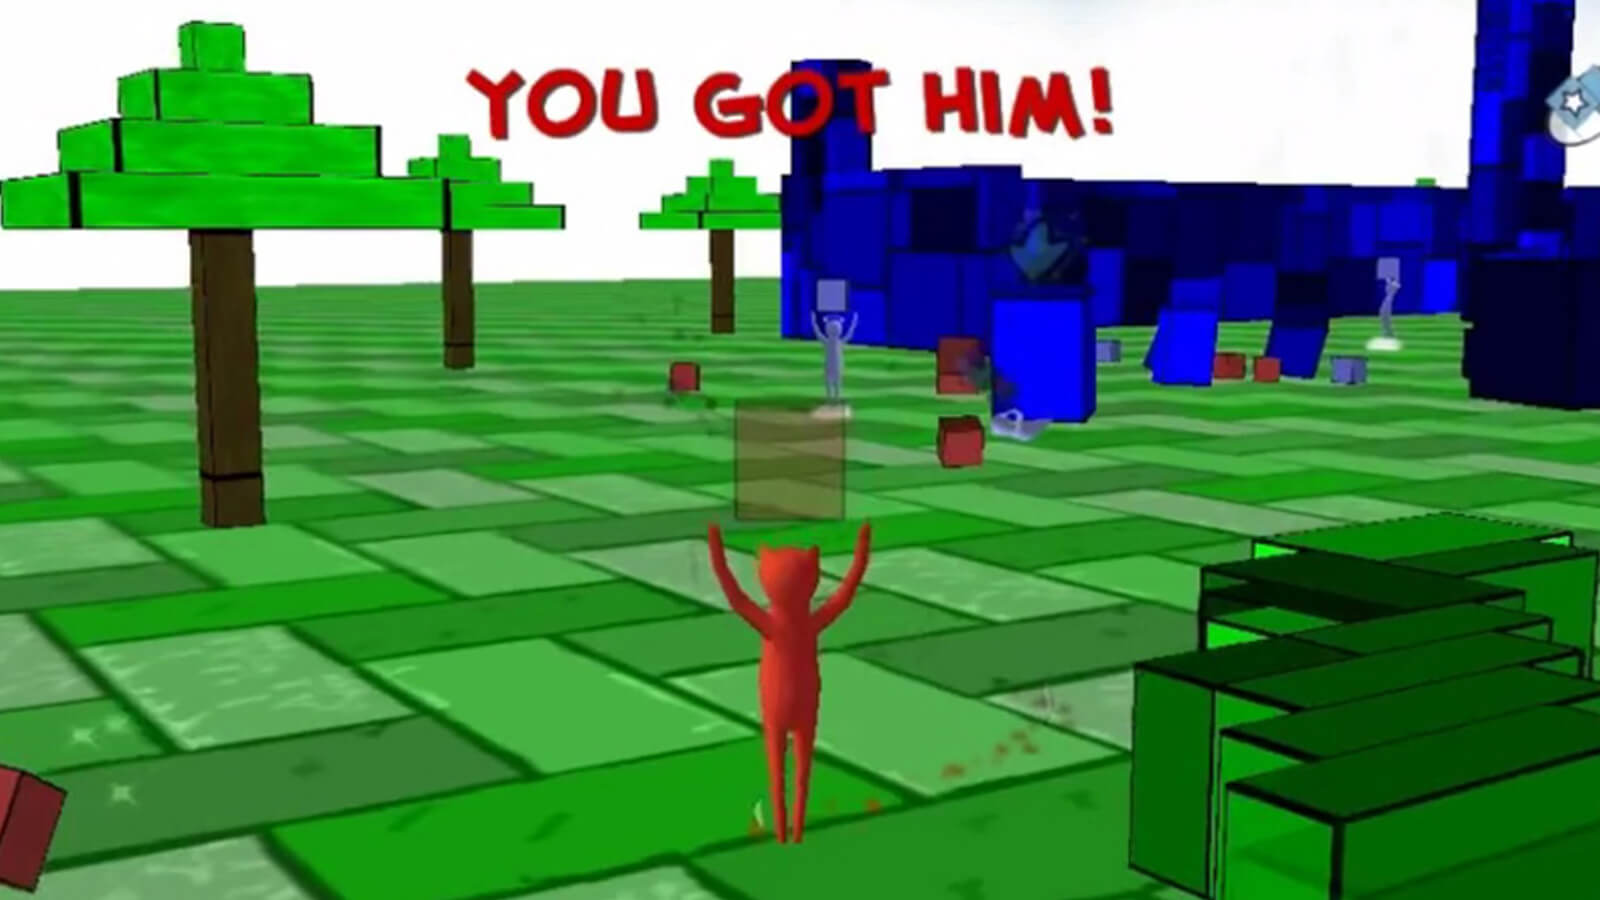 A demon holds a block in the air with the words "YOU GOT HIM!" above.